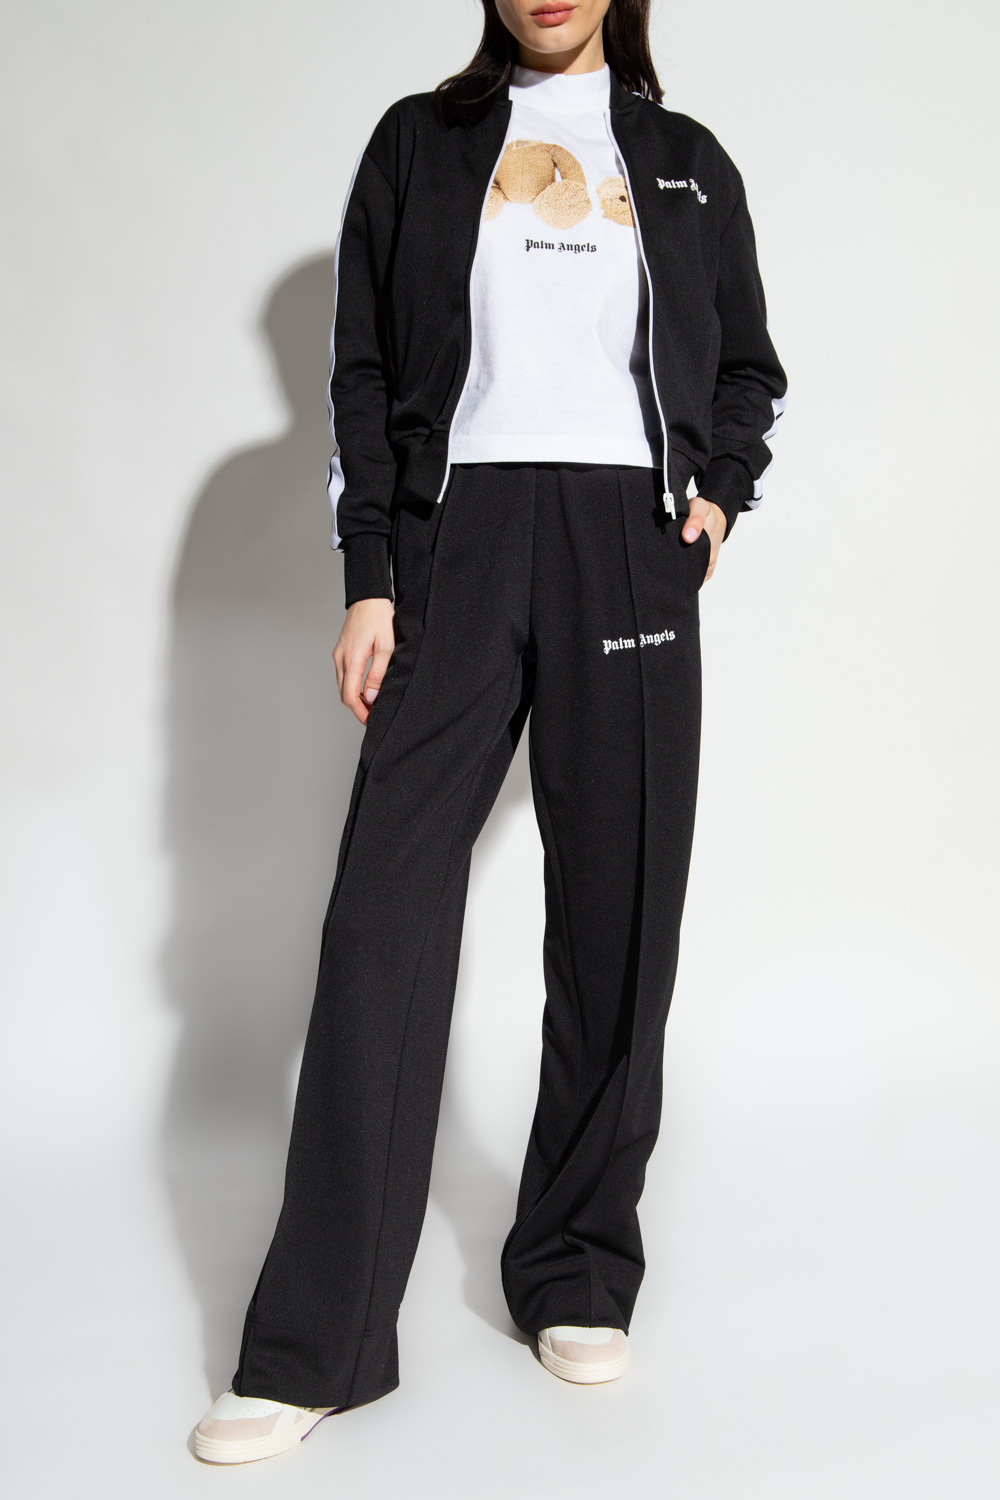 Black Trousers with logo Palm Angels - GenesinlifeShops Spain - Superdry  Core 7 8 Tight Leggings